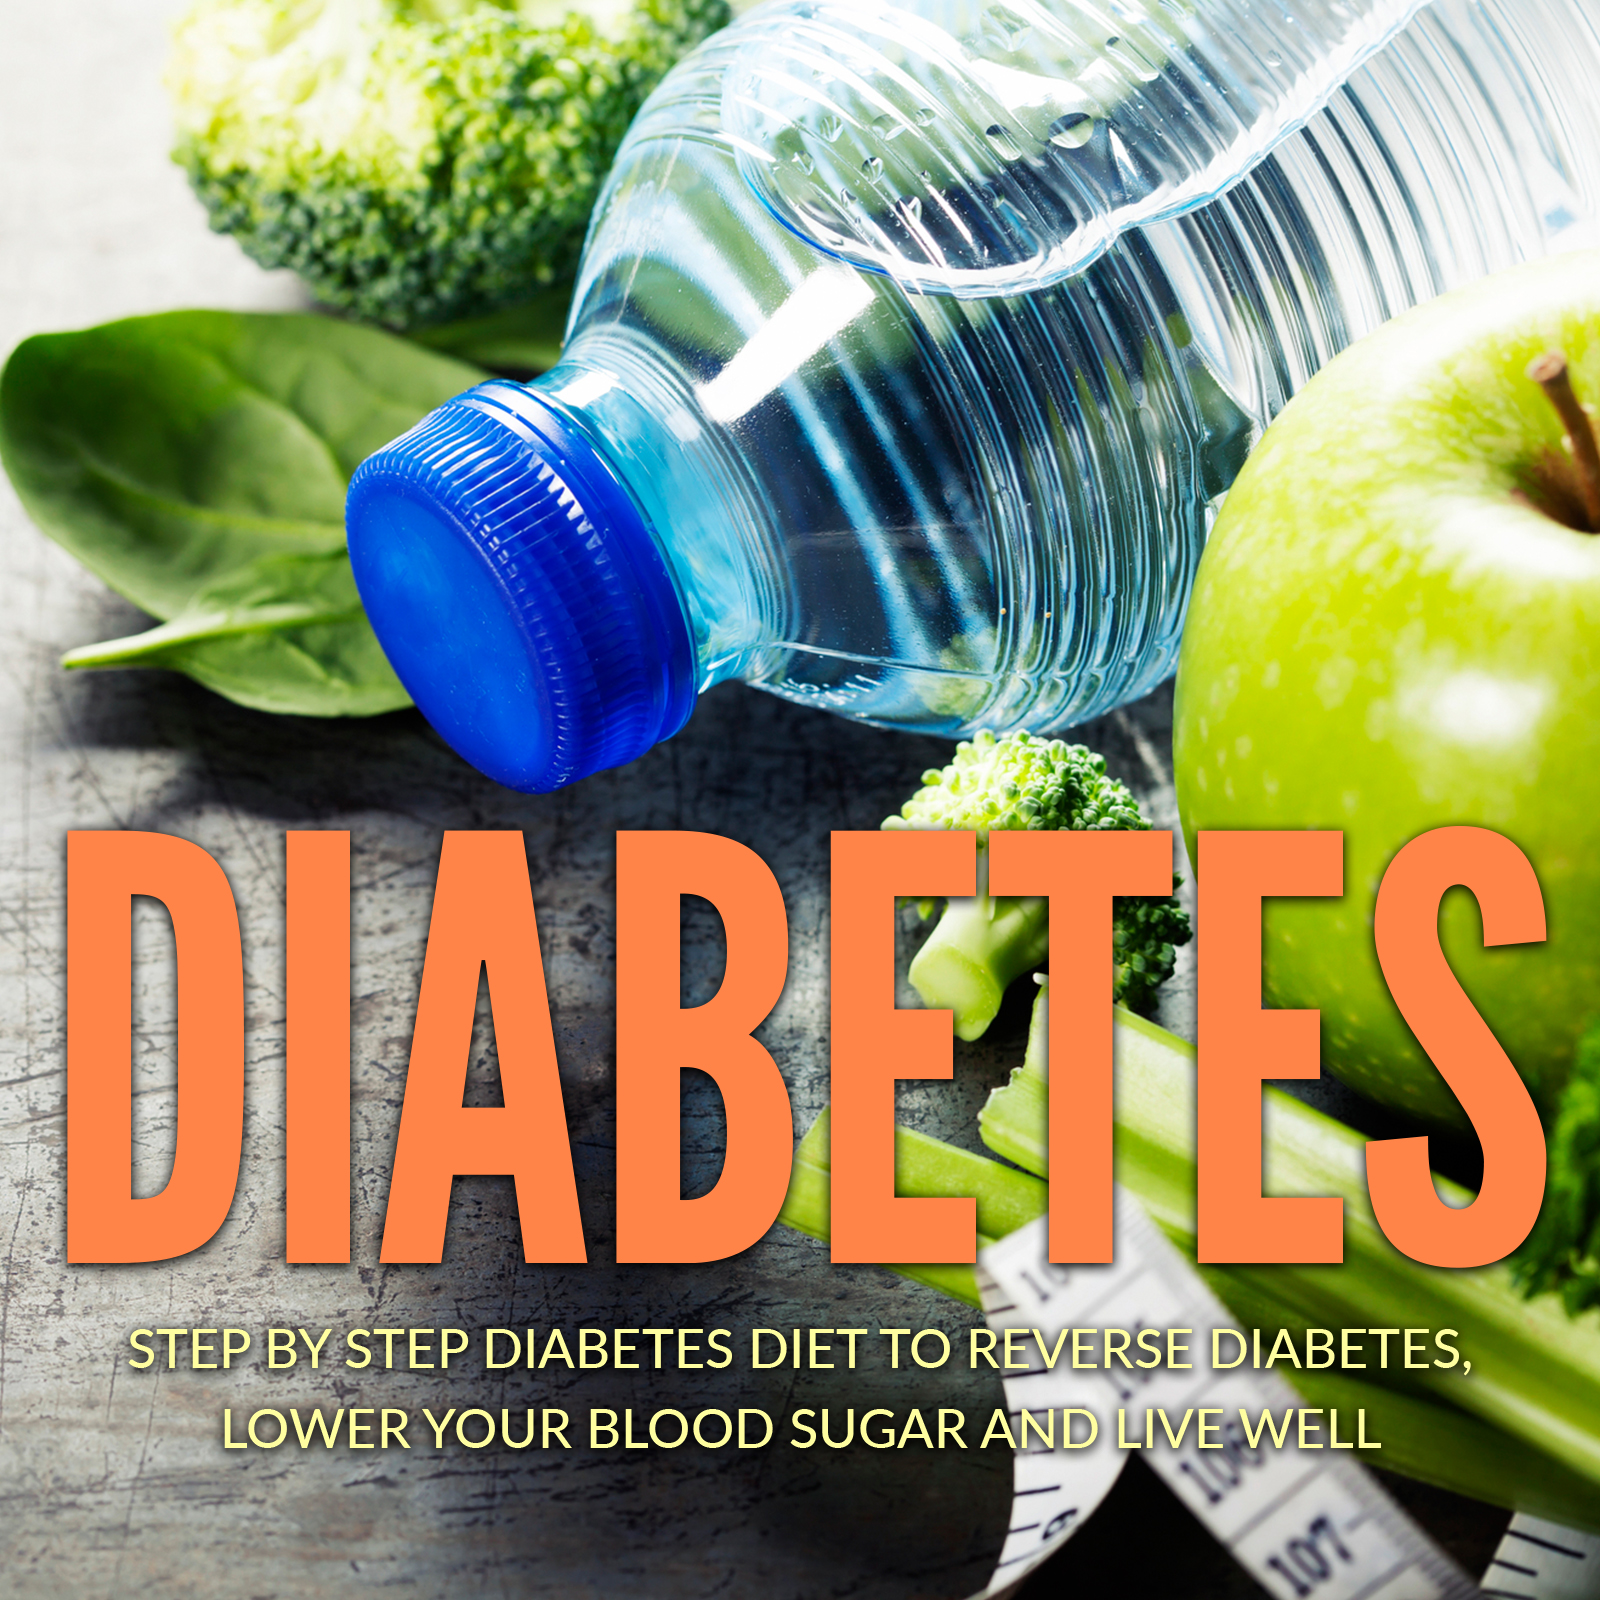 FREE: Diabetes: Step by Step Diabetes Diet to Reverse Diabetes, Lower Your Blood Sugar and Live Well by James Wayne